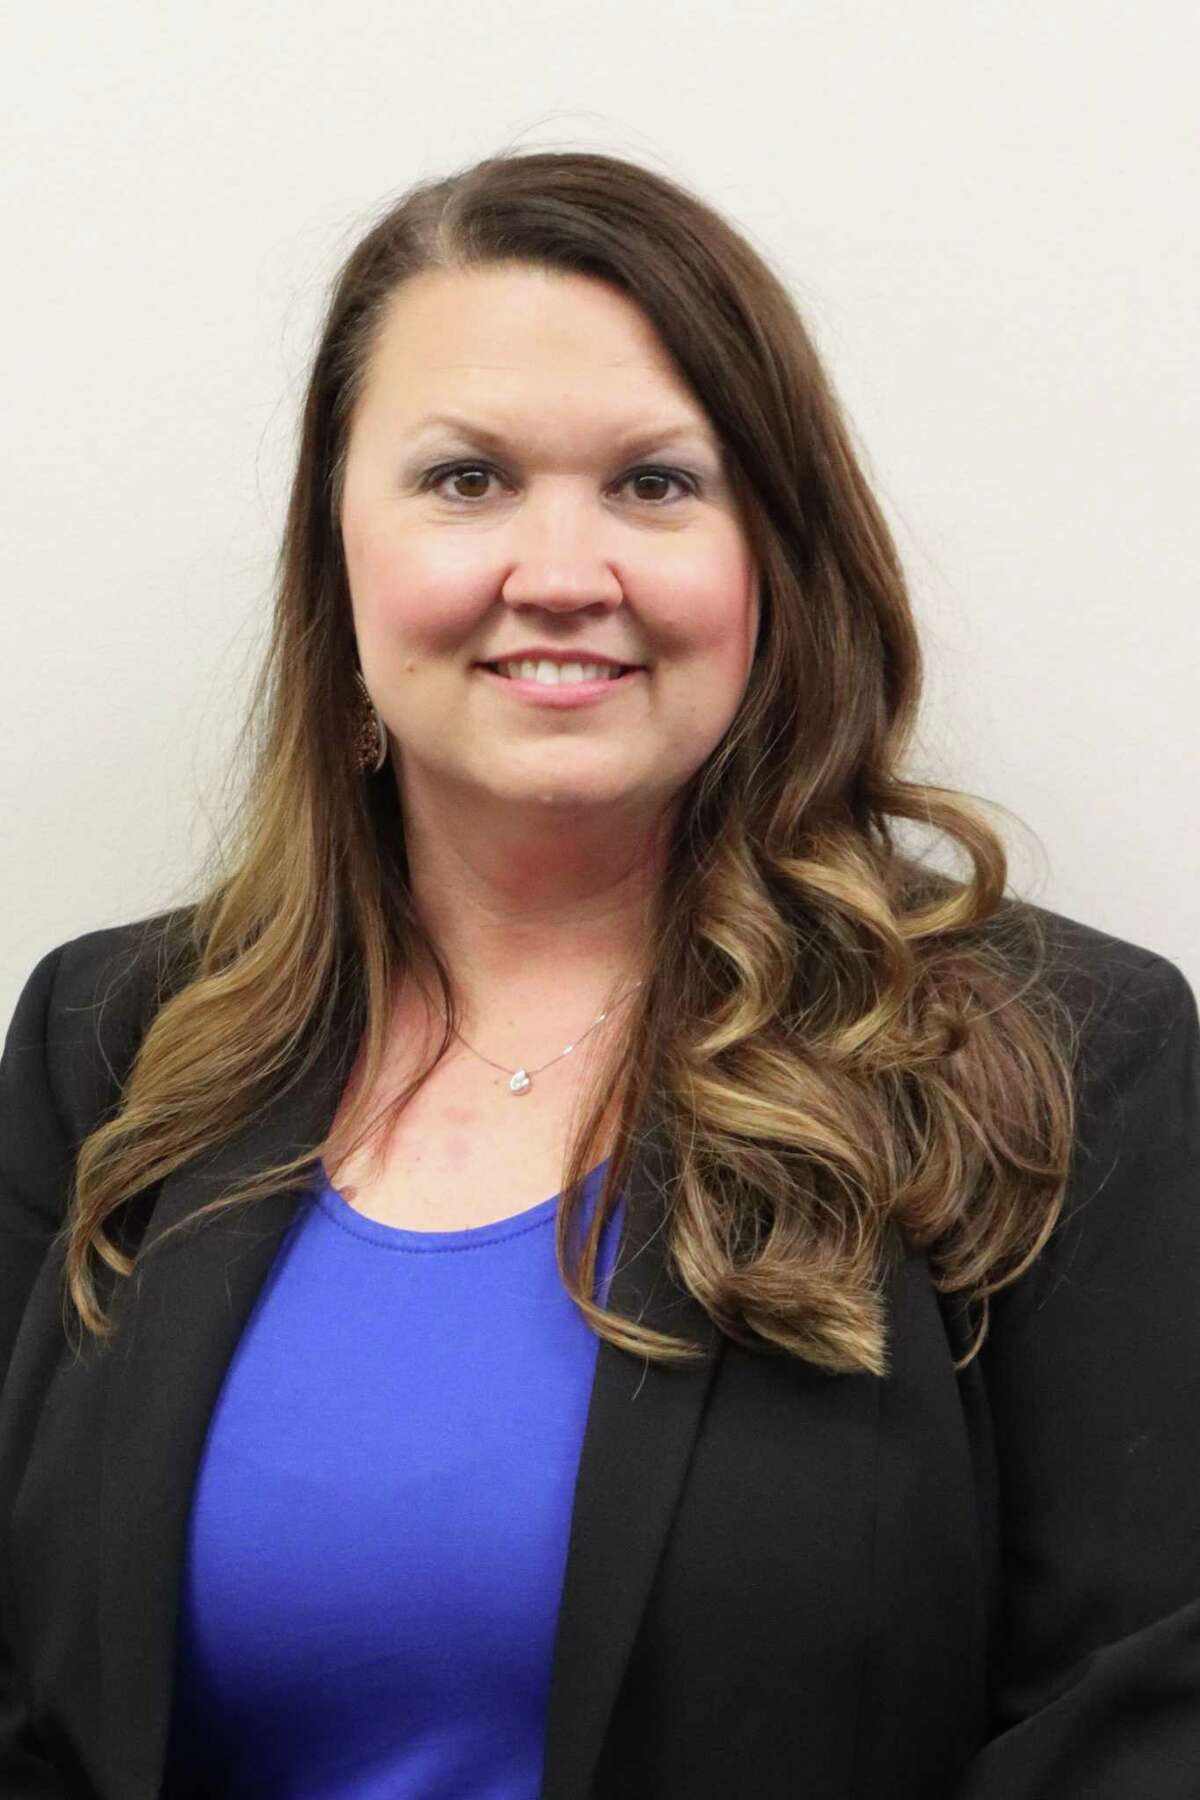 Amanda Windsor, former assistant principal at Shadycrest Elementary School, has been named principal of Cockrell Elementary School.